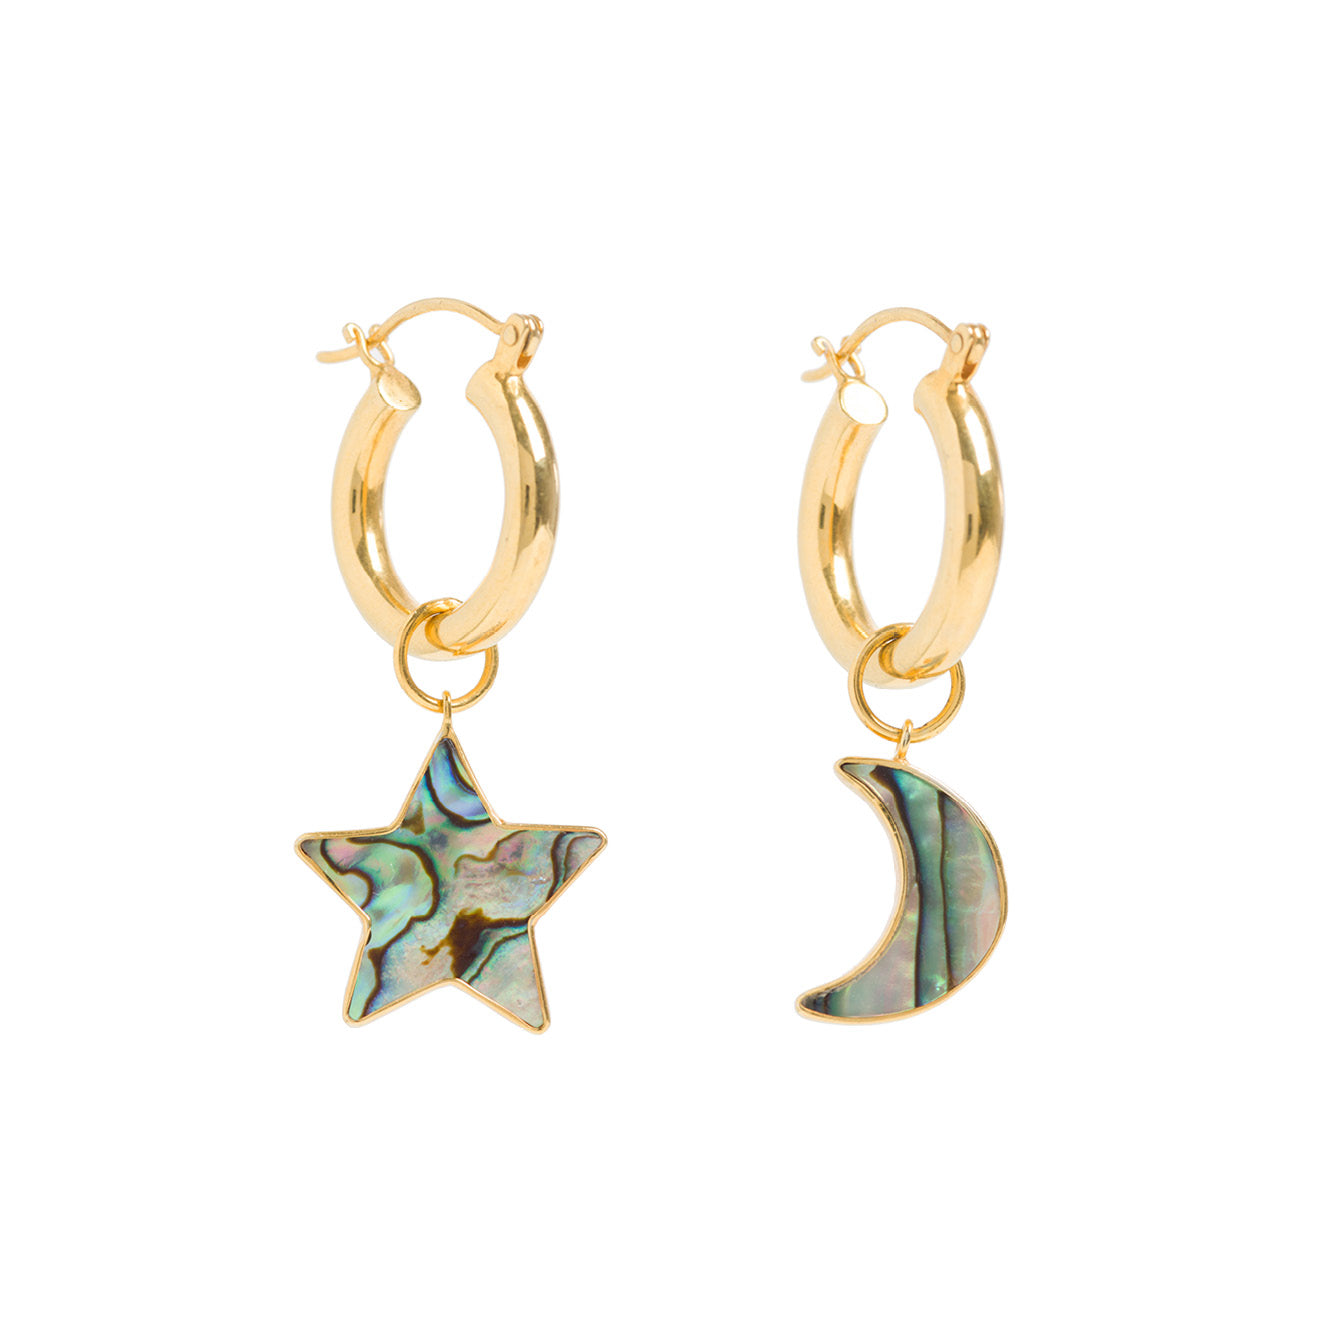 Product image of Gold Mini Hoop Earrings with detachable star and moon pendants made of paua shell by Freya Rose London